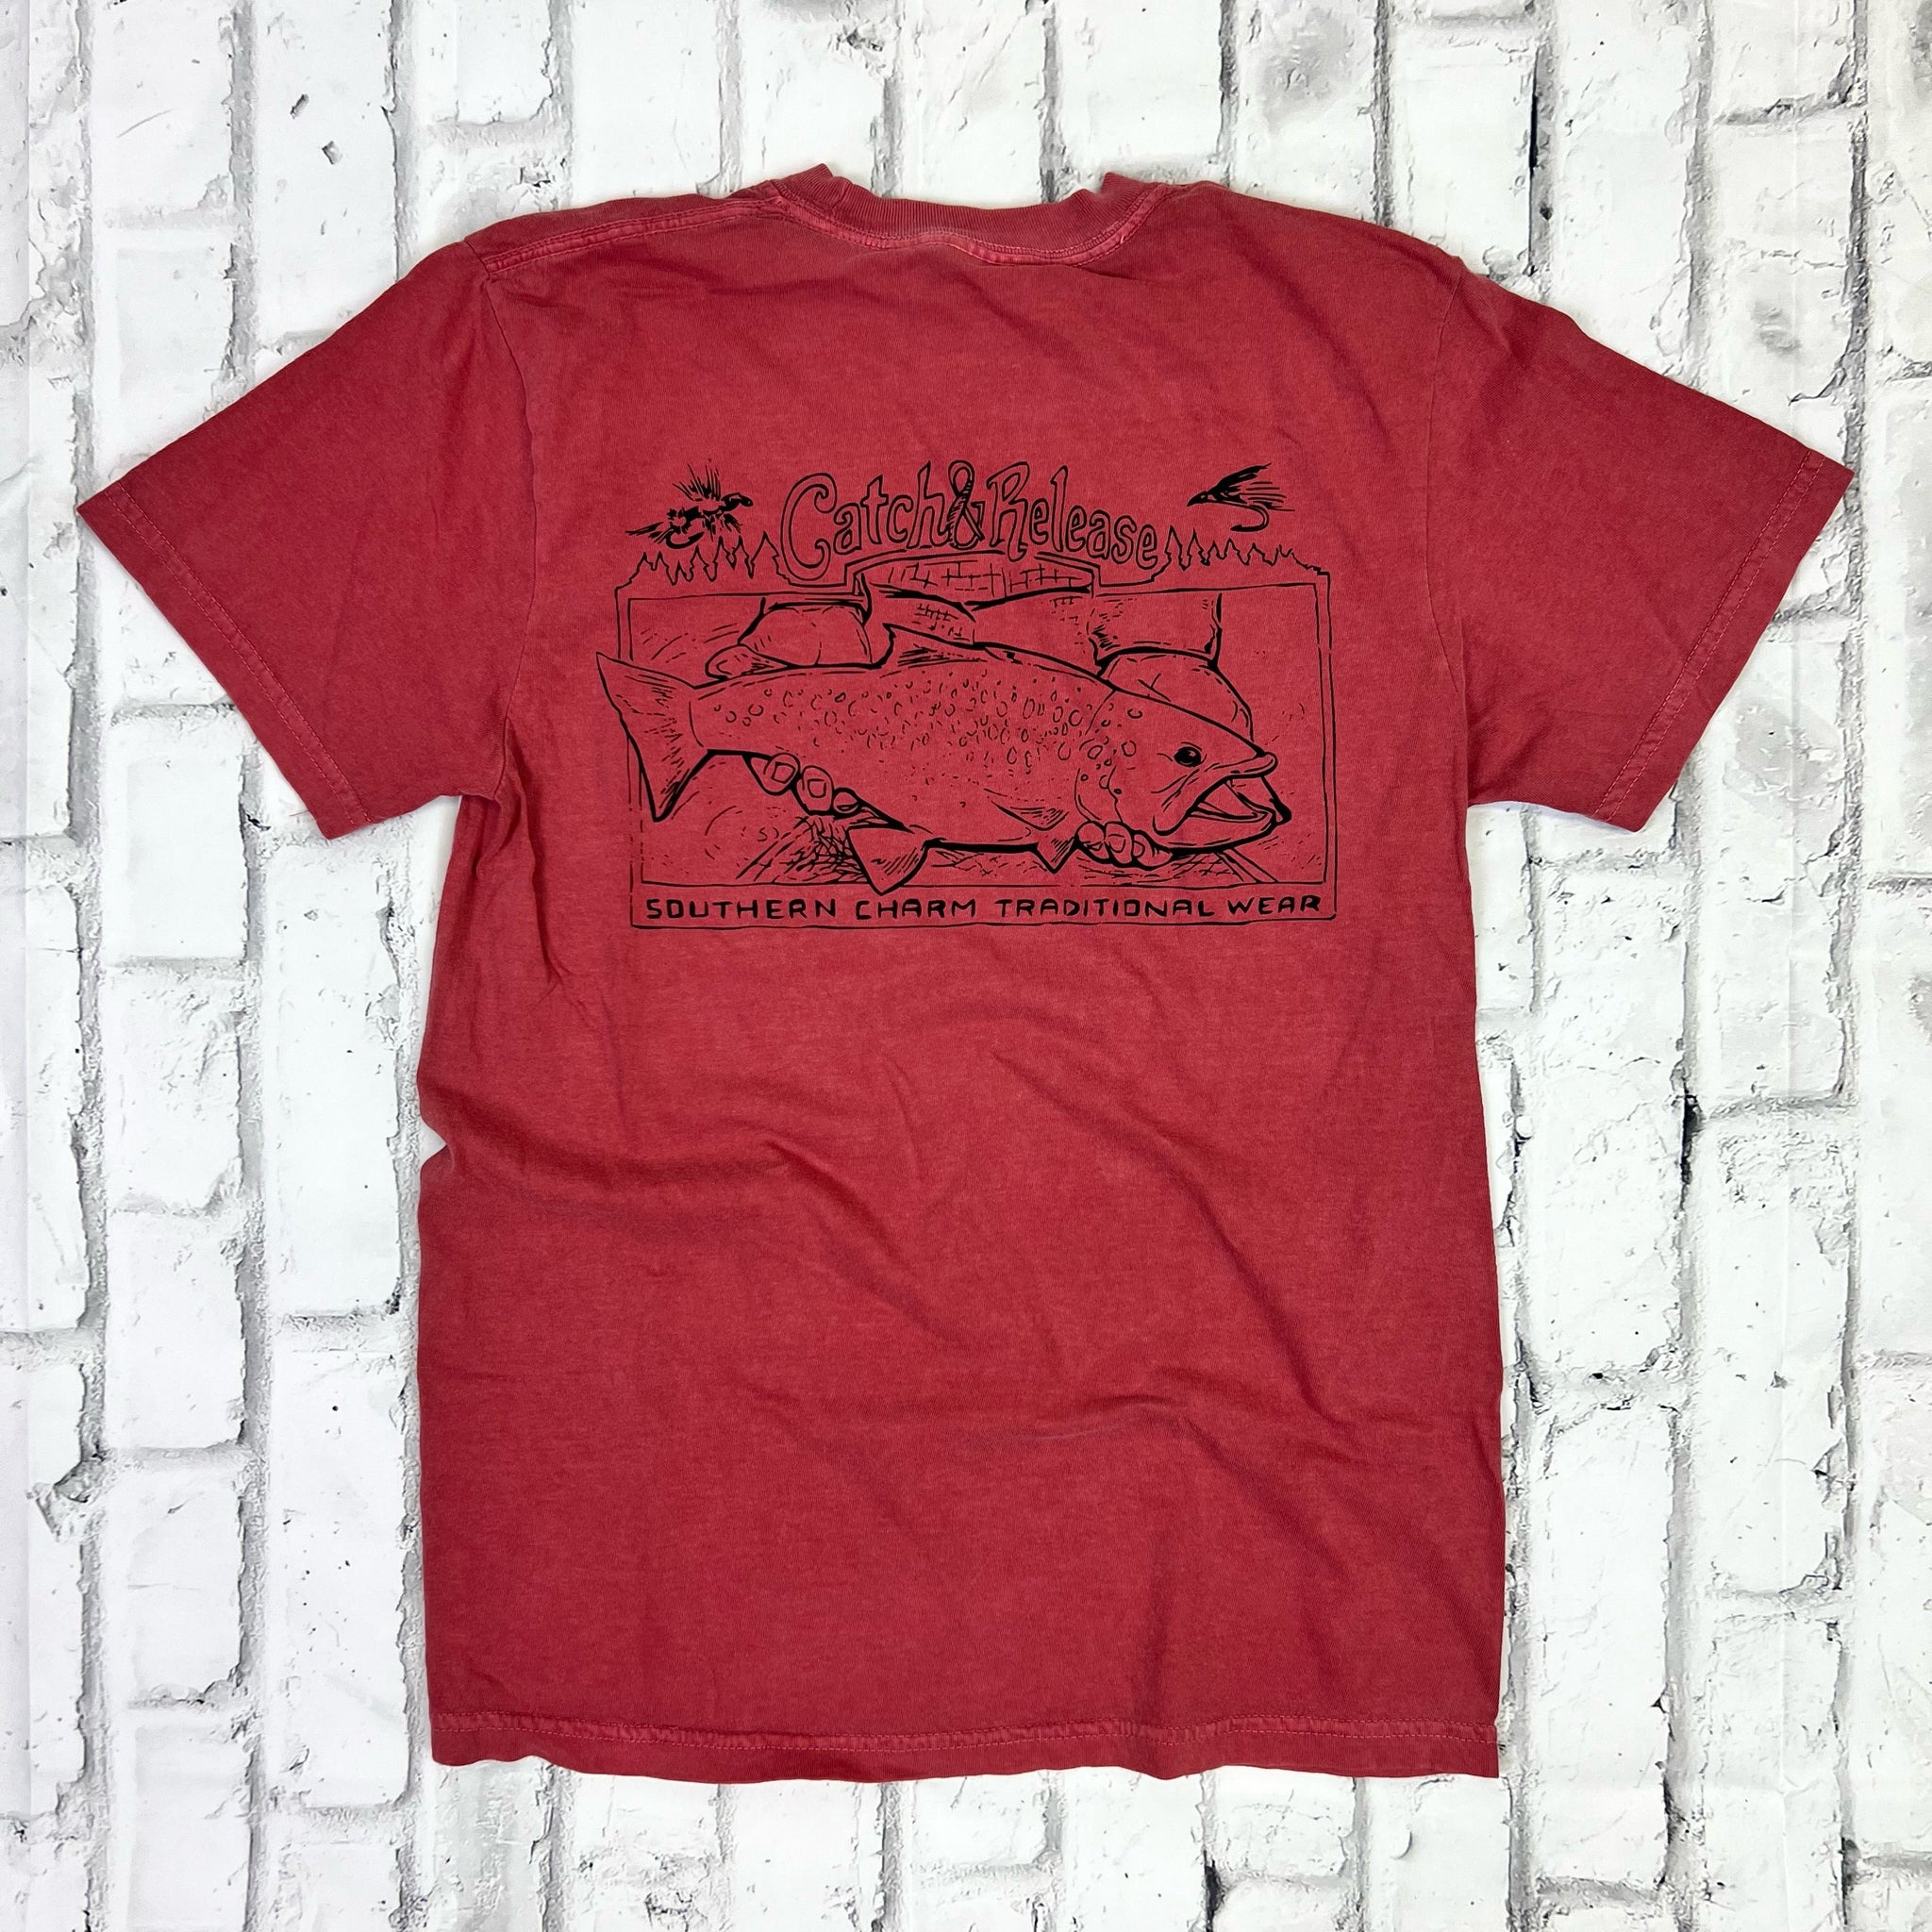 Southern Charm "Catch and Release" Short Sleeve T-shirt - Red